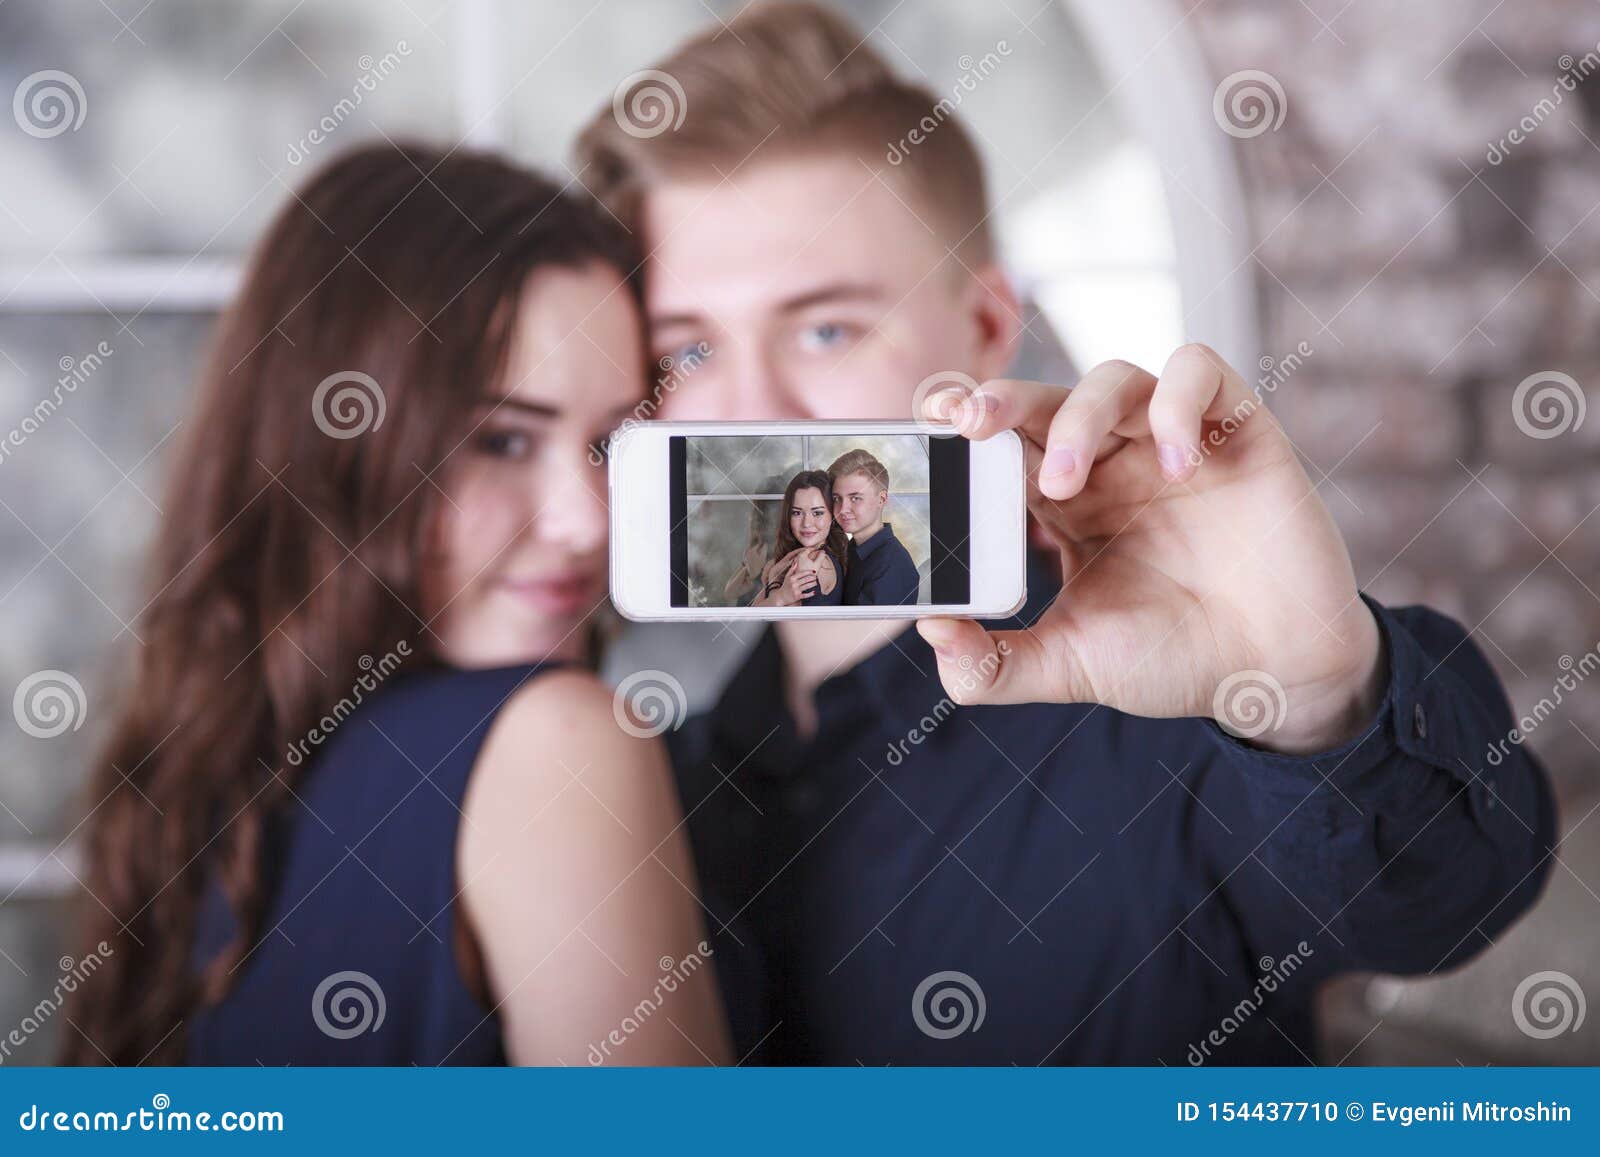 40 Best Selfie Poses For Couples – Buzz16 | Funny couple pictures, Couples,  Funny couples